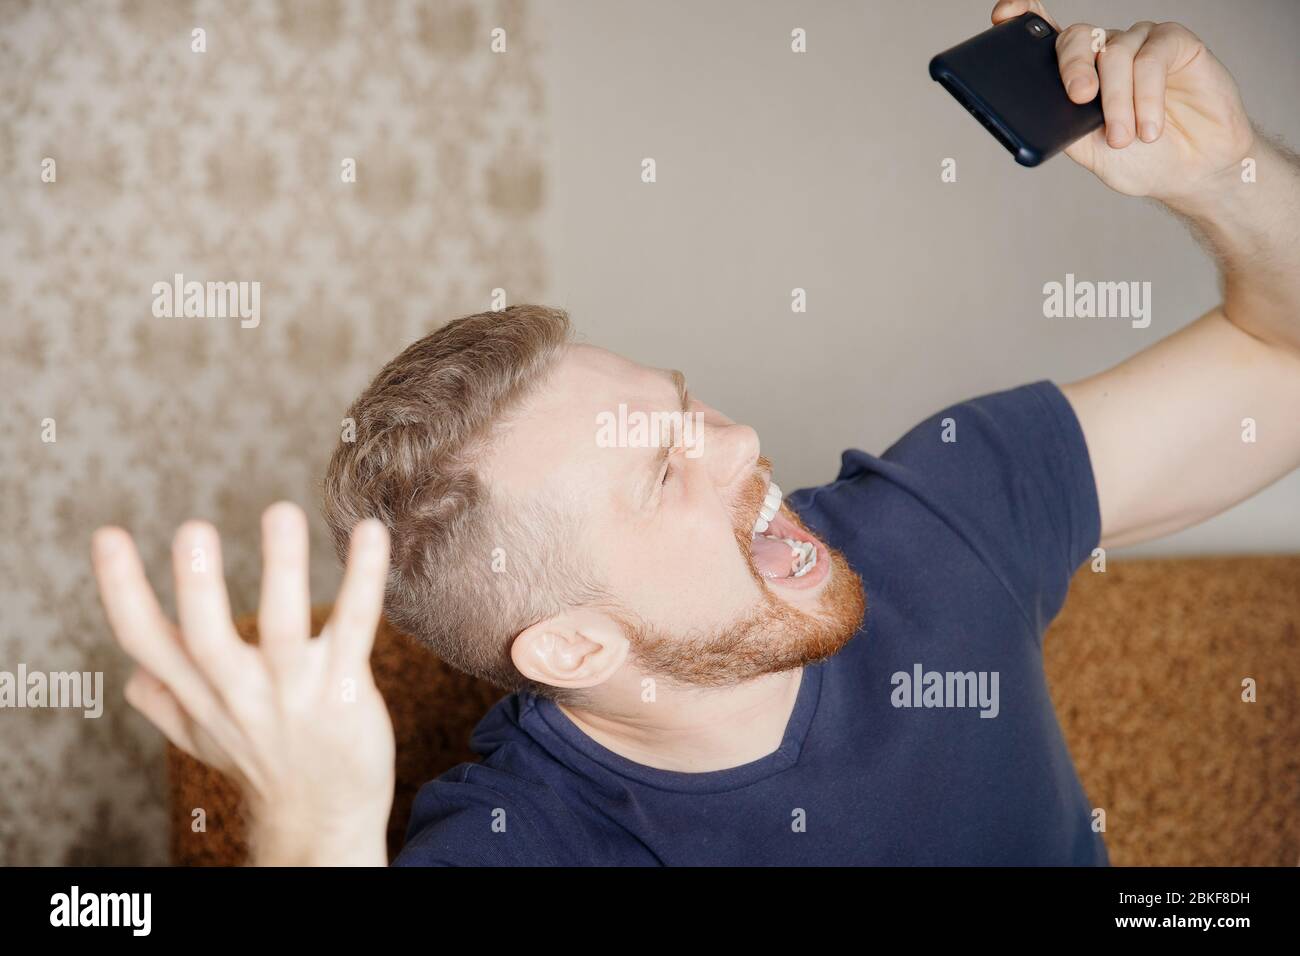 Man shouts holding phone. Loss concept loosing mobile games online. Stock Photo